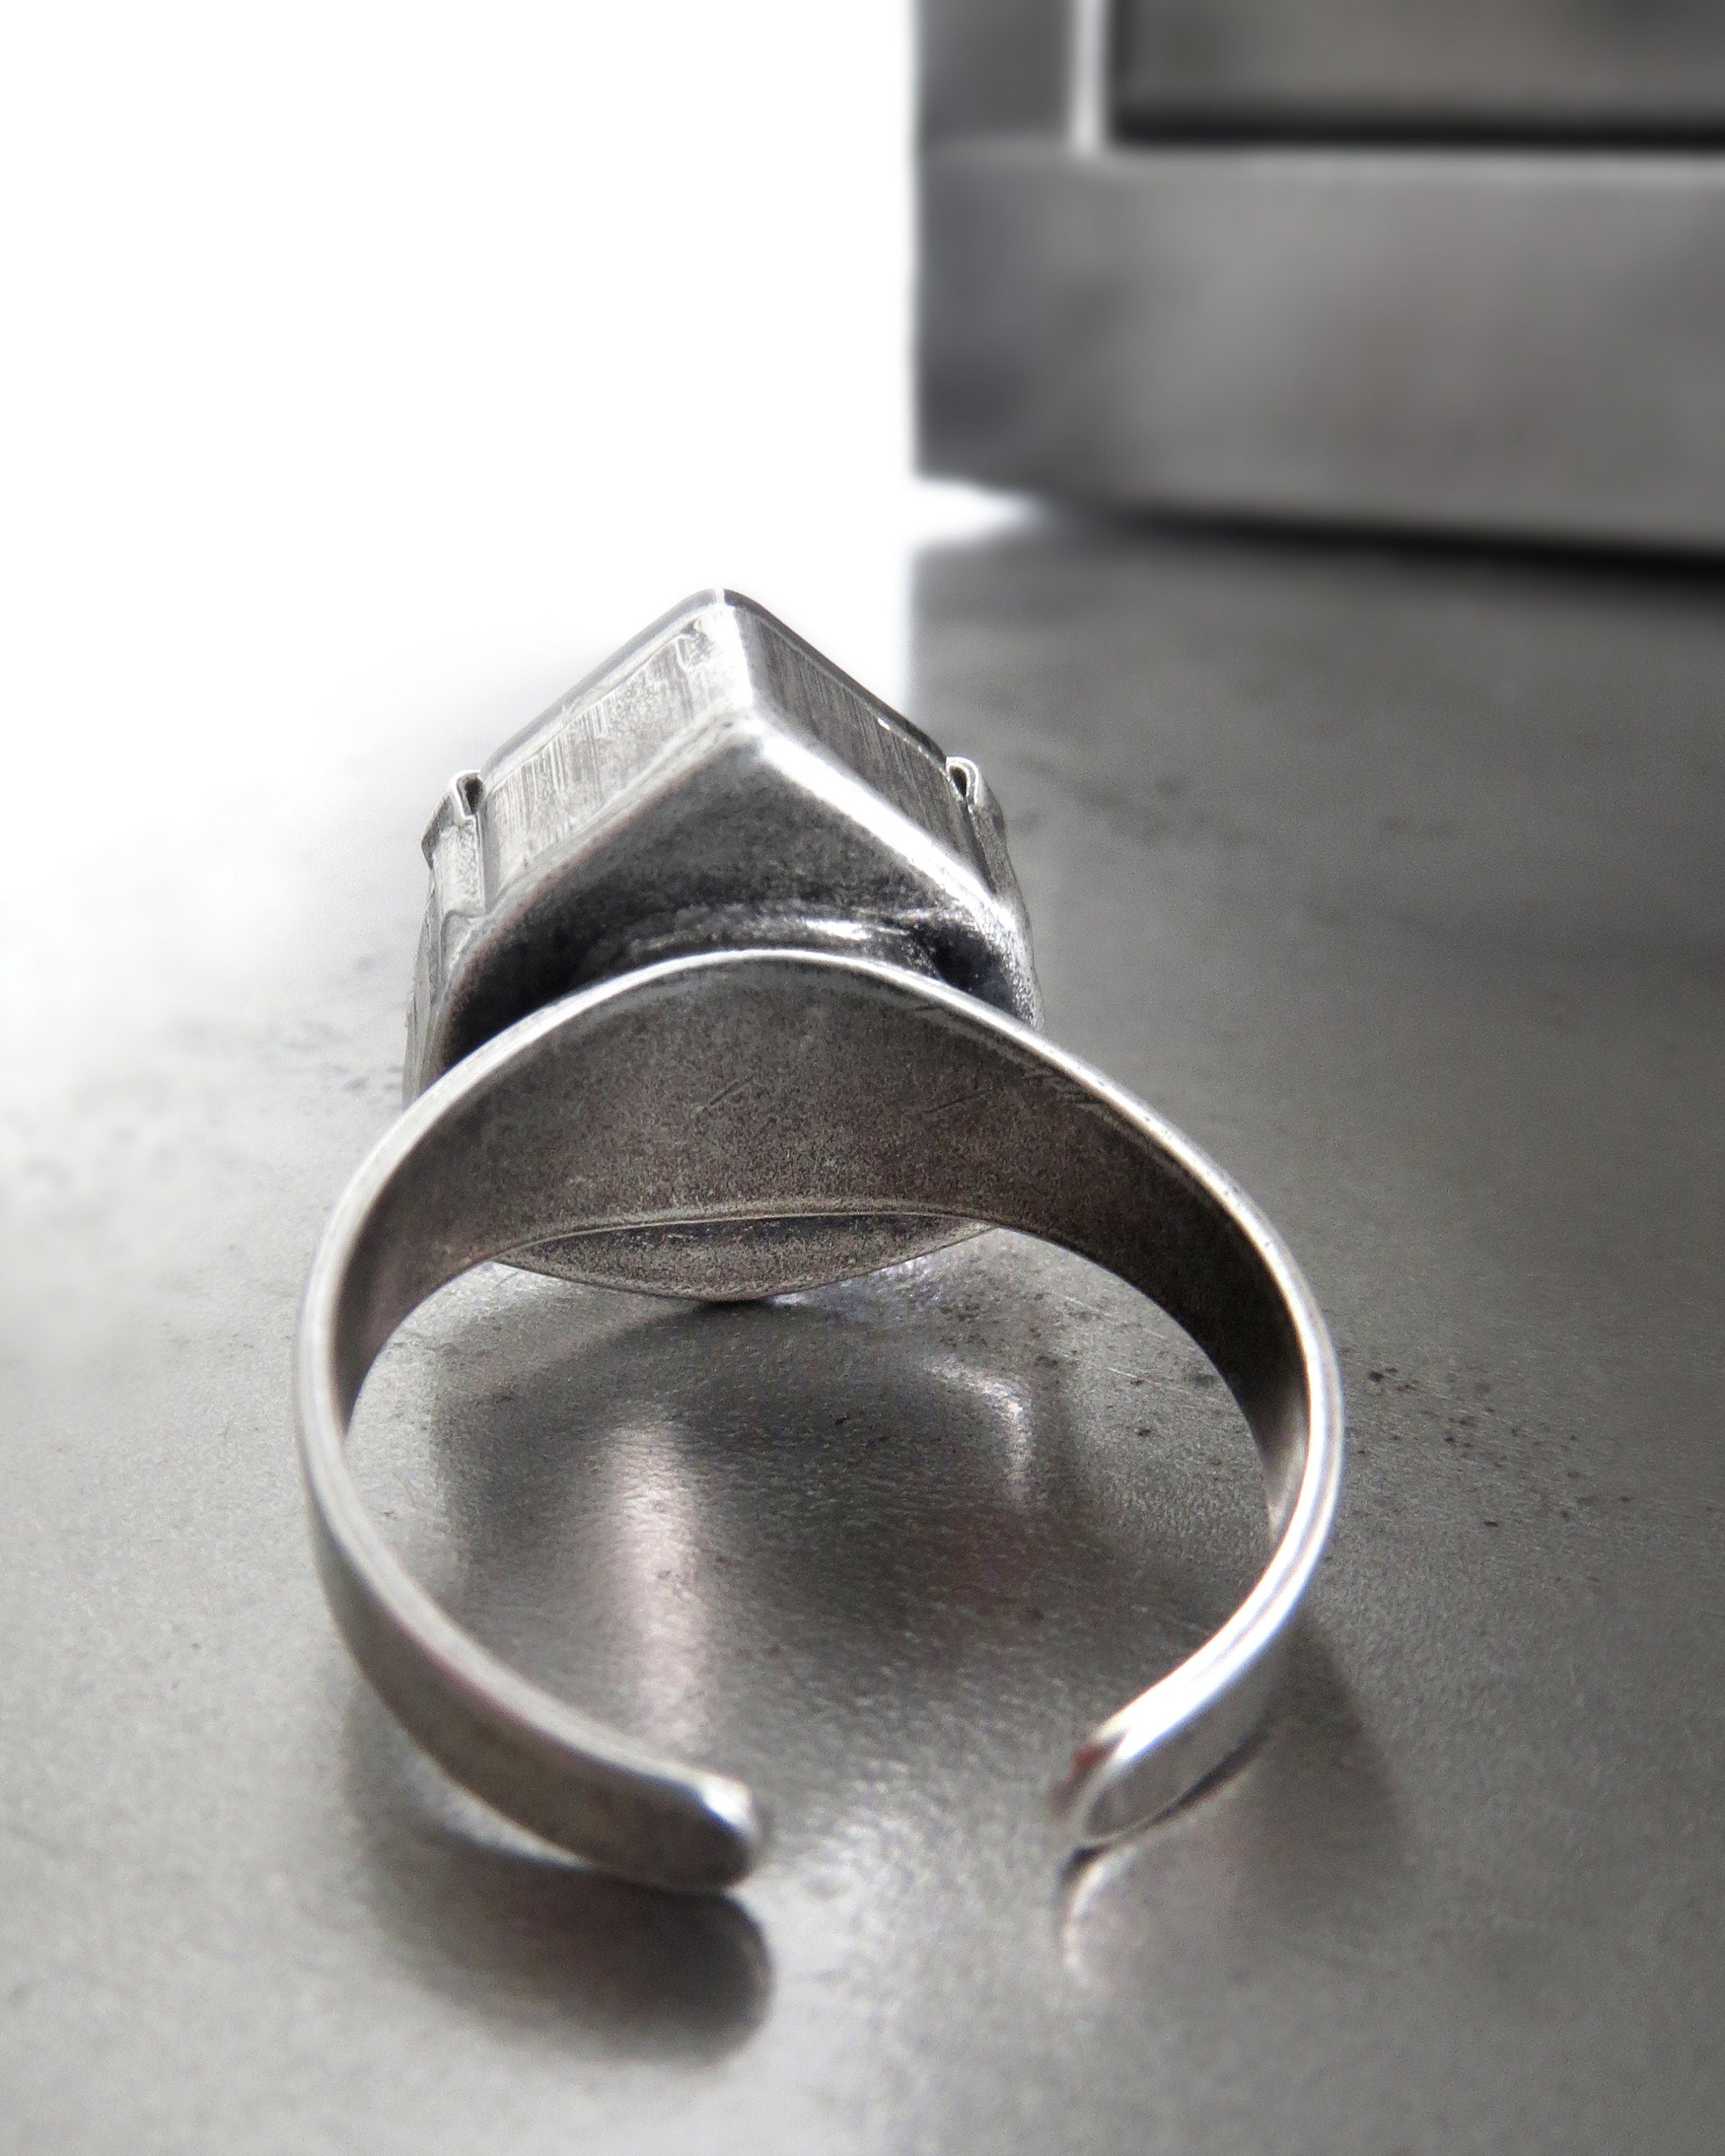 IMPERIAL - Sheer Silver Crystal Ring - Triangle Shape Trilliant Crystal Ring with Warm Grey Silver Sheen - Antiqued Silver Adjustable Band